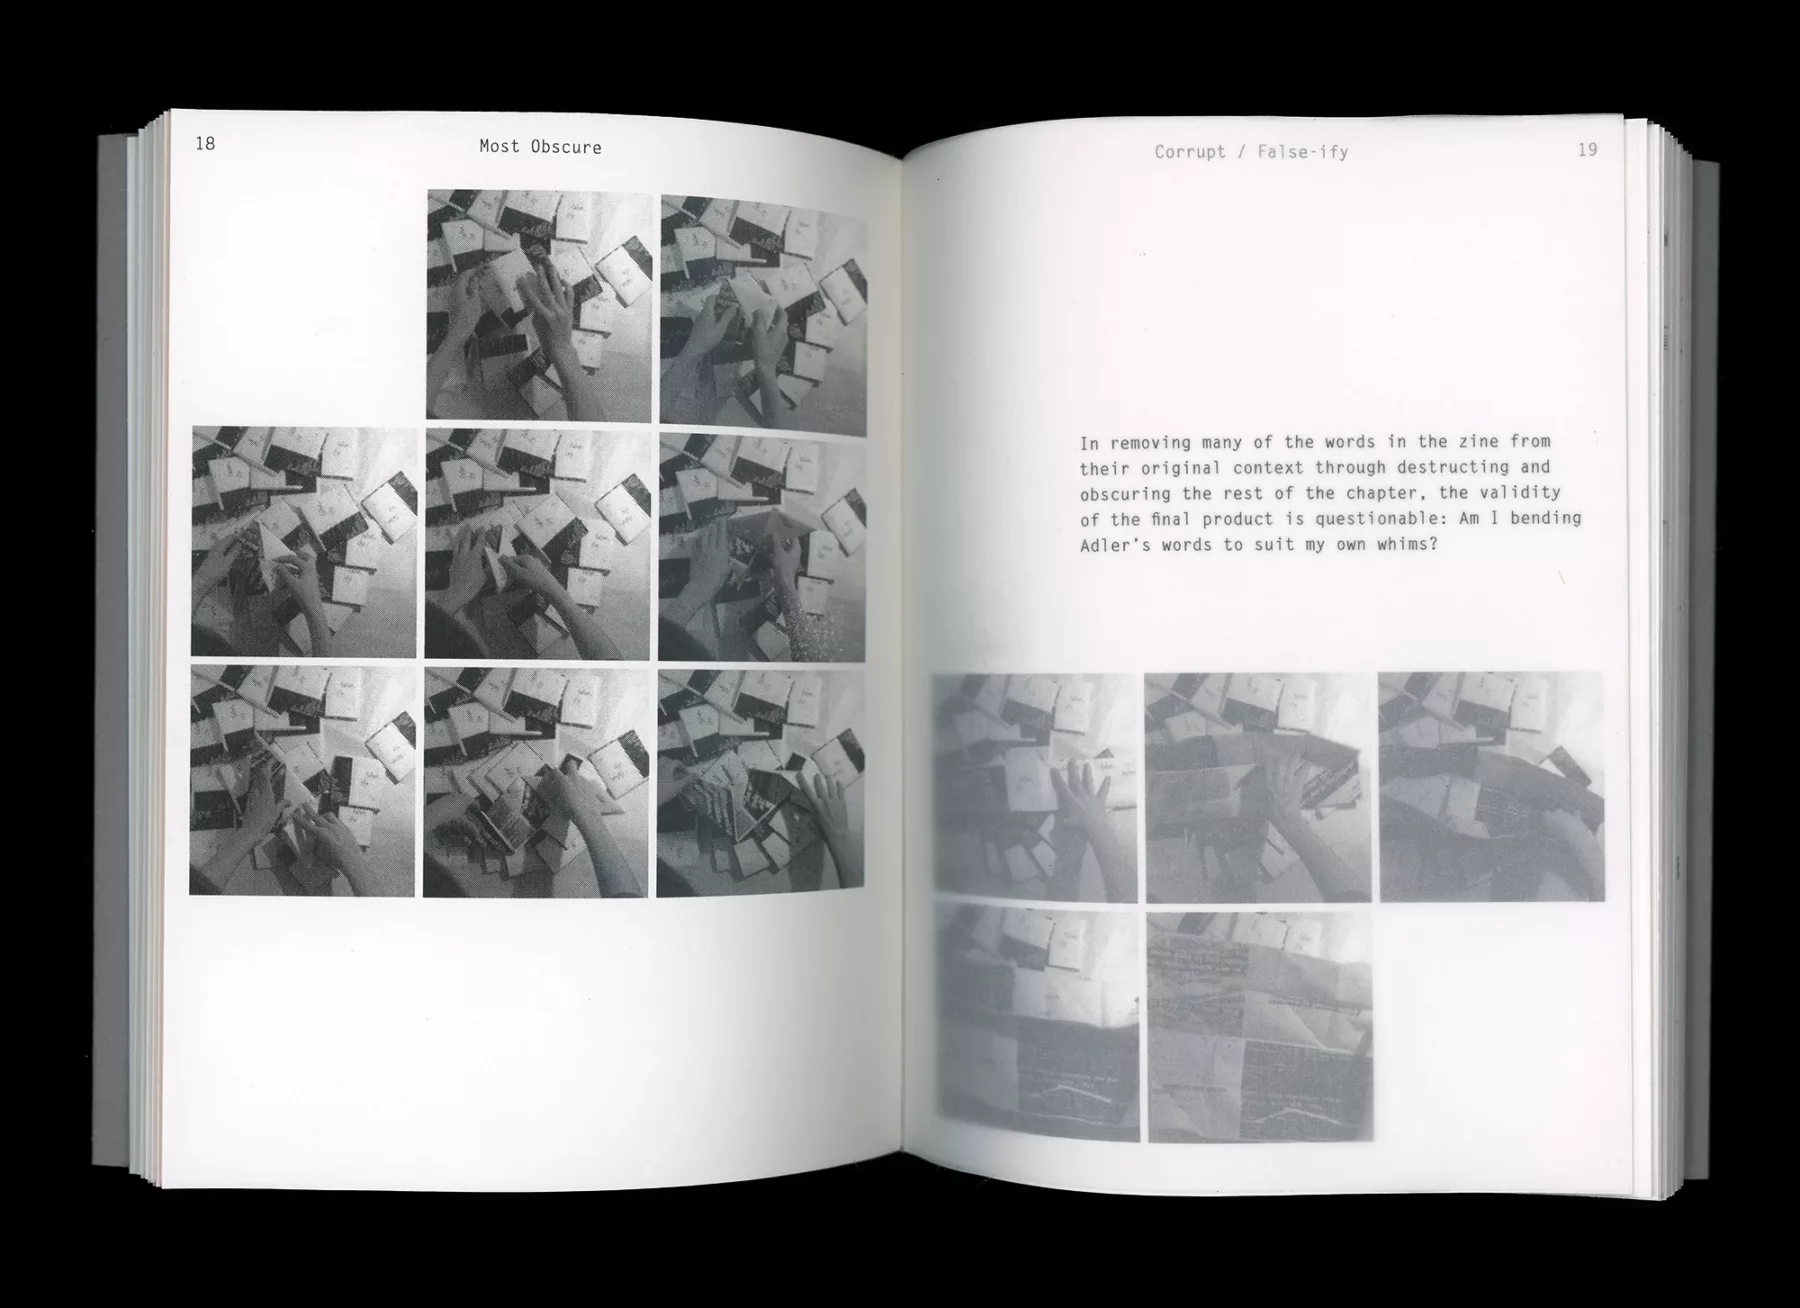 Spread of 'Most Obscure' book showing frames of the zine folding and unfolding.